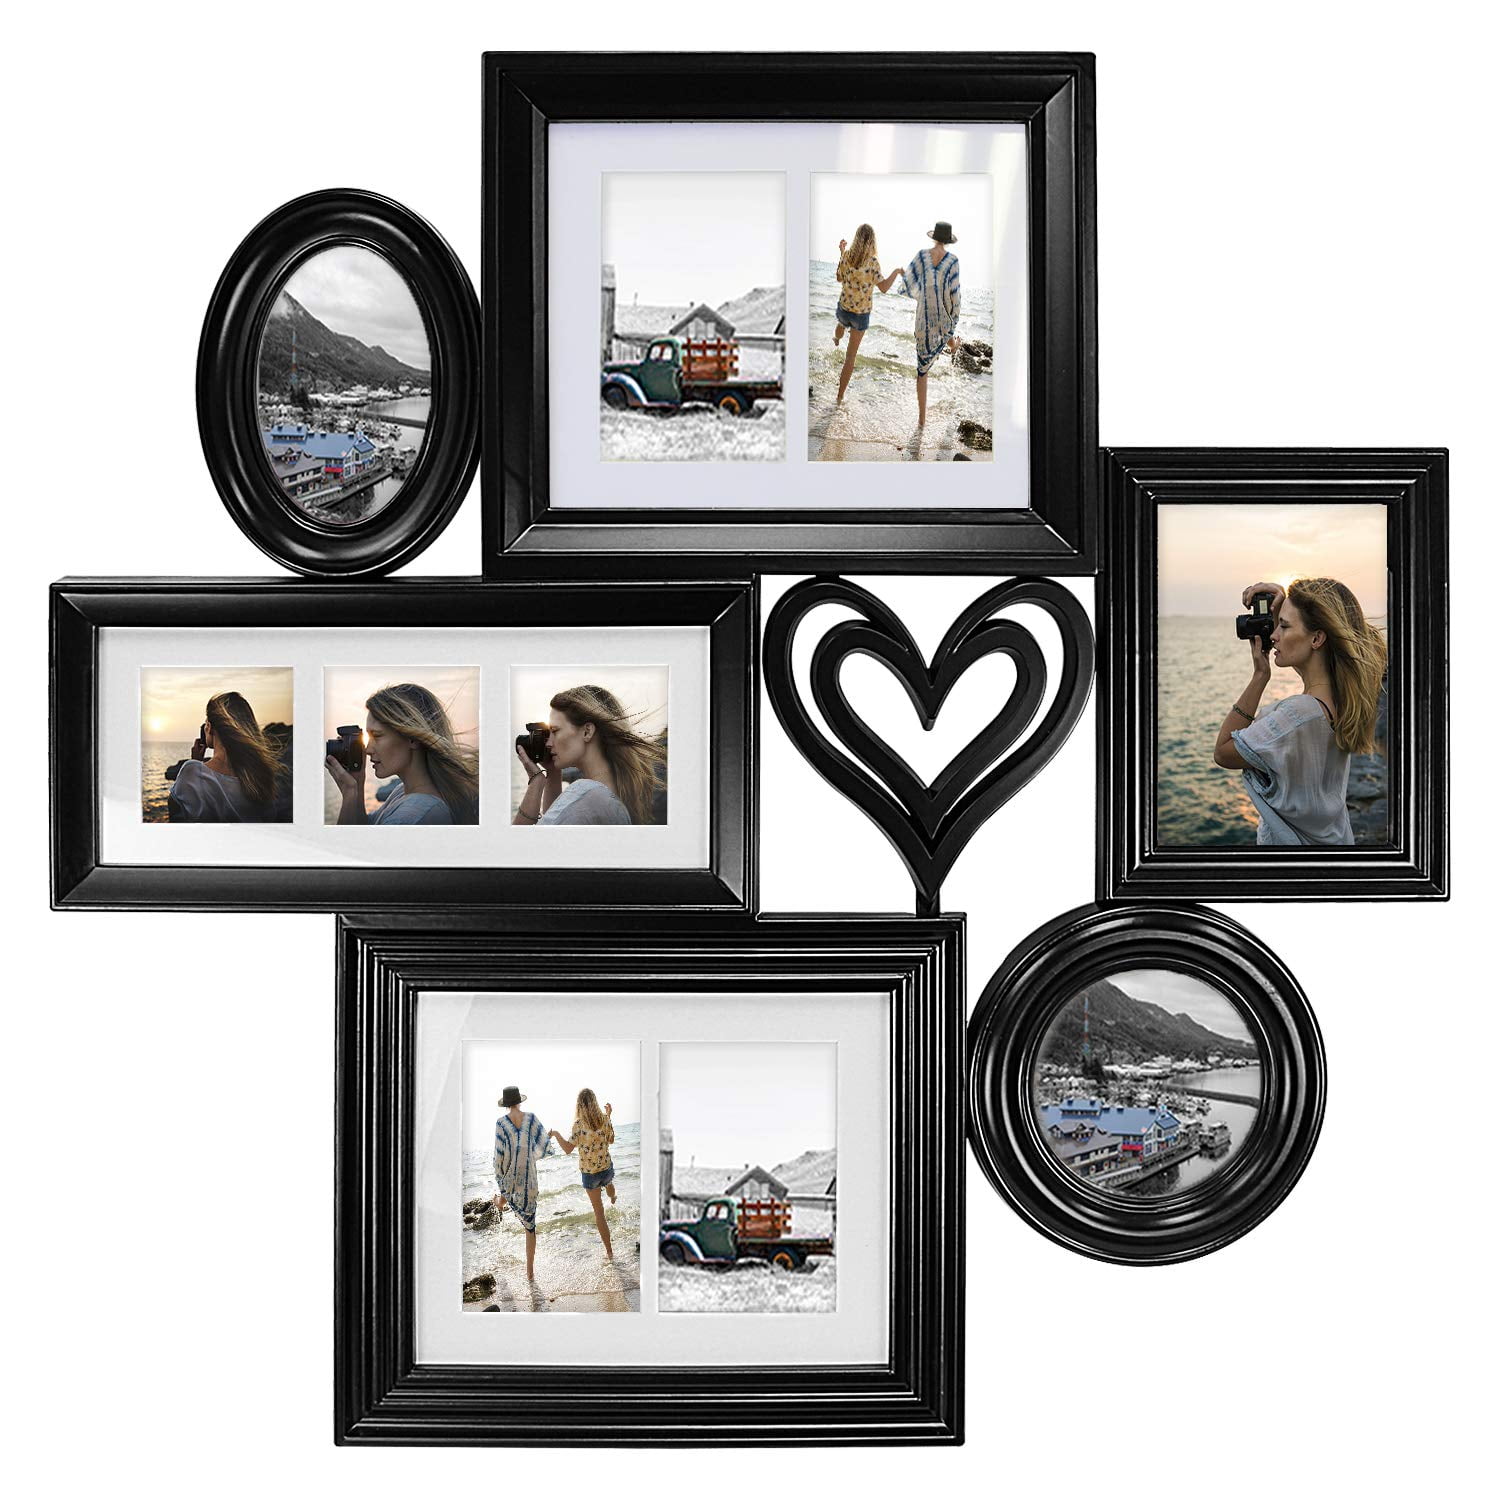 Mahogany Frames by Mail Double Oval Single Square Opening Collage Frame for 4 x 6 Photo